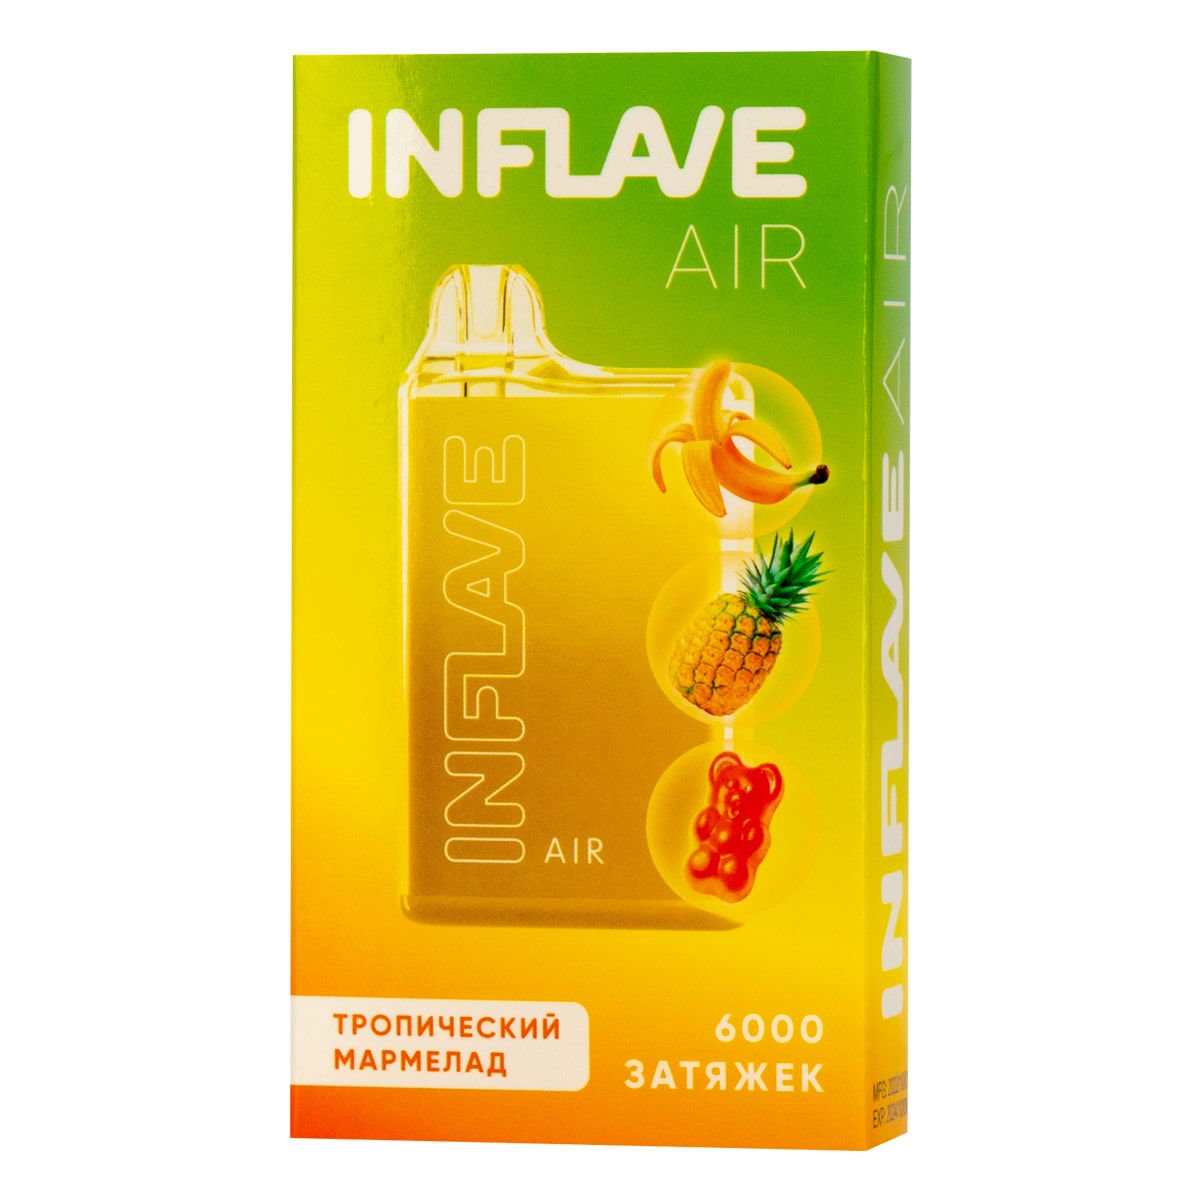 Inflave air. Inflave электронная сигарета гуава. Inflave Air - манго маракуйя (6000). Inflave Air Banana Pineapple Jelly. Inflave Air - тропический мармела (6000).